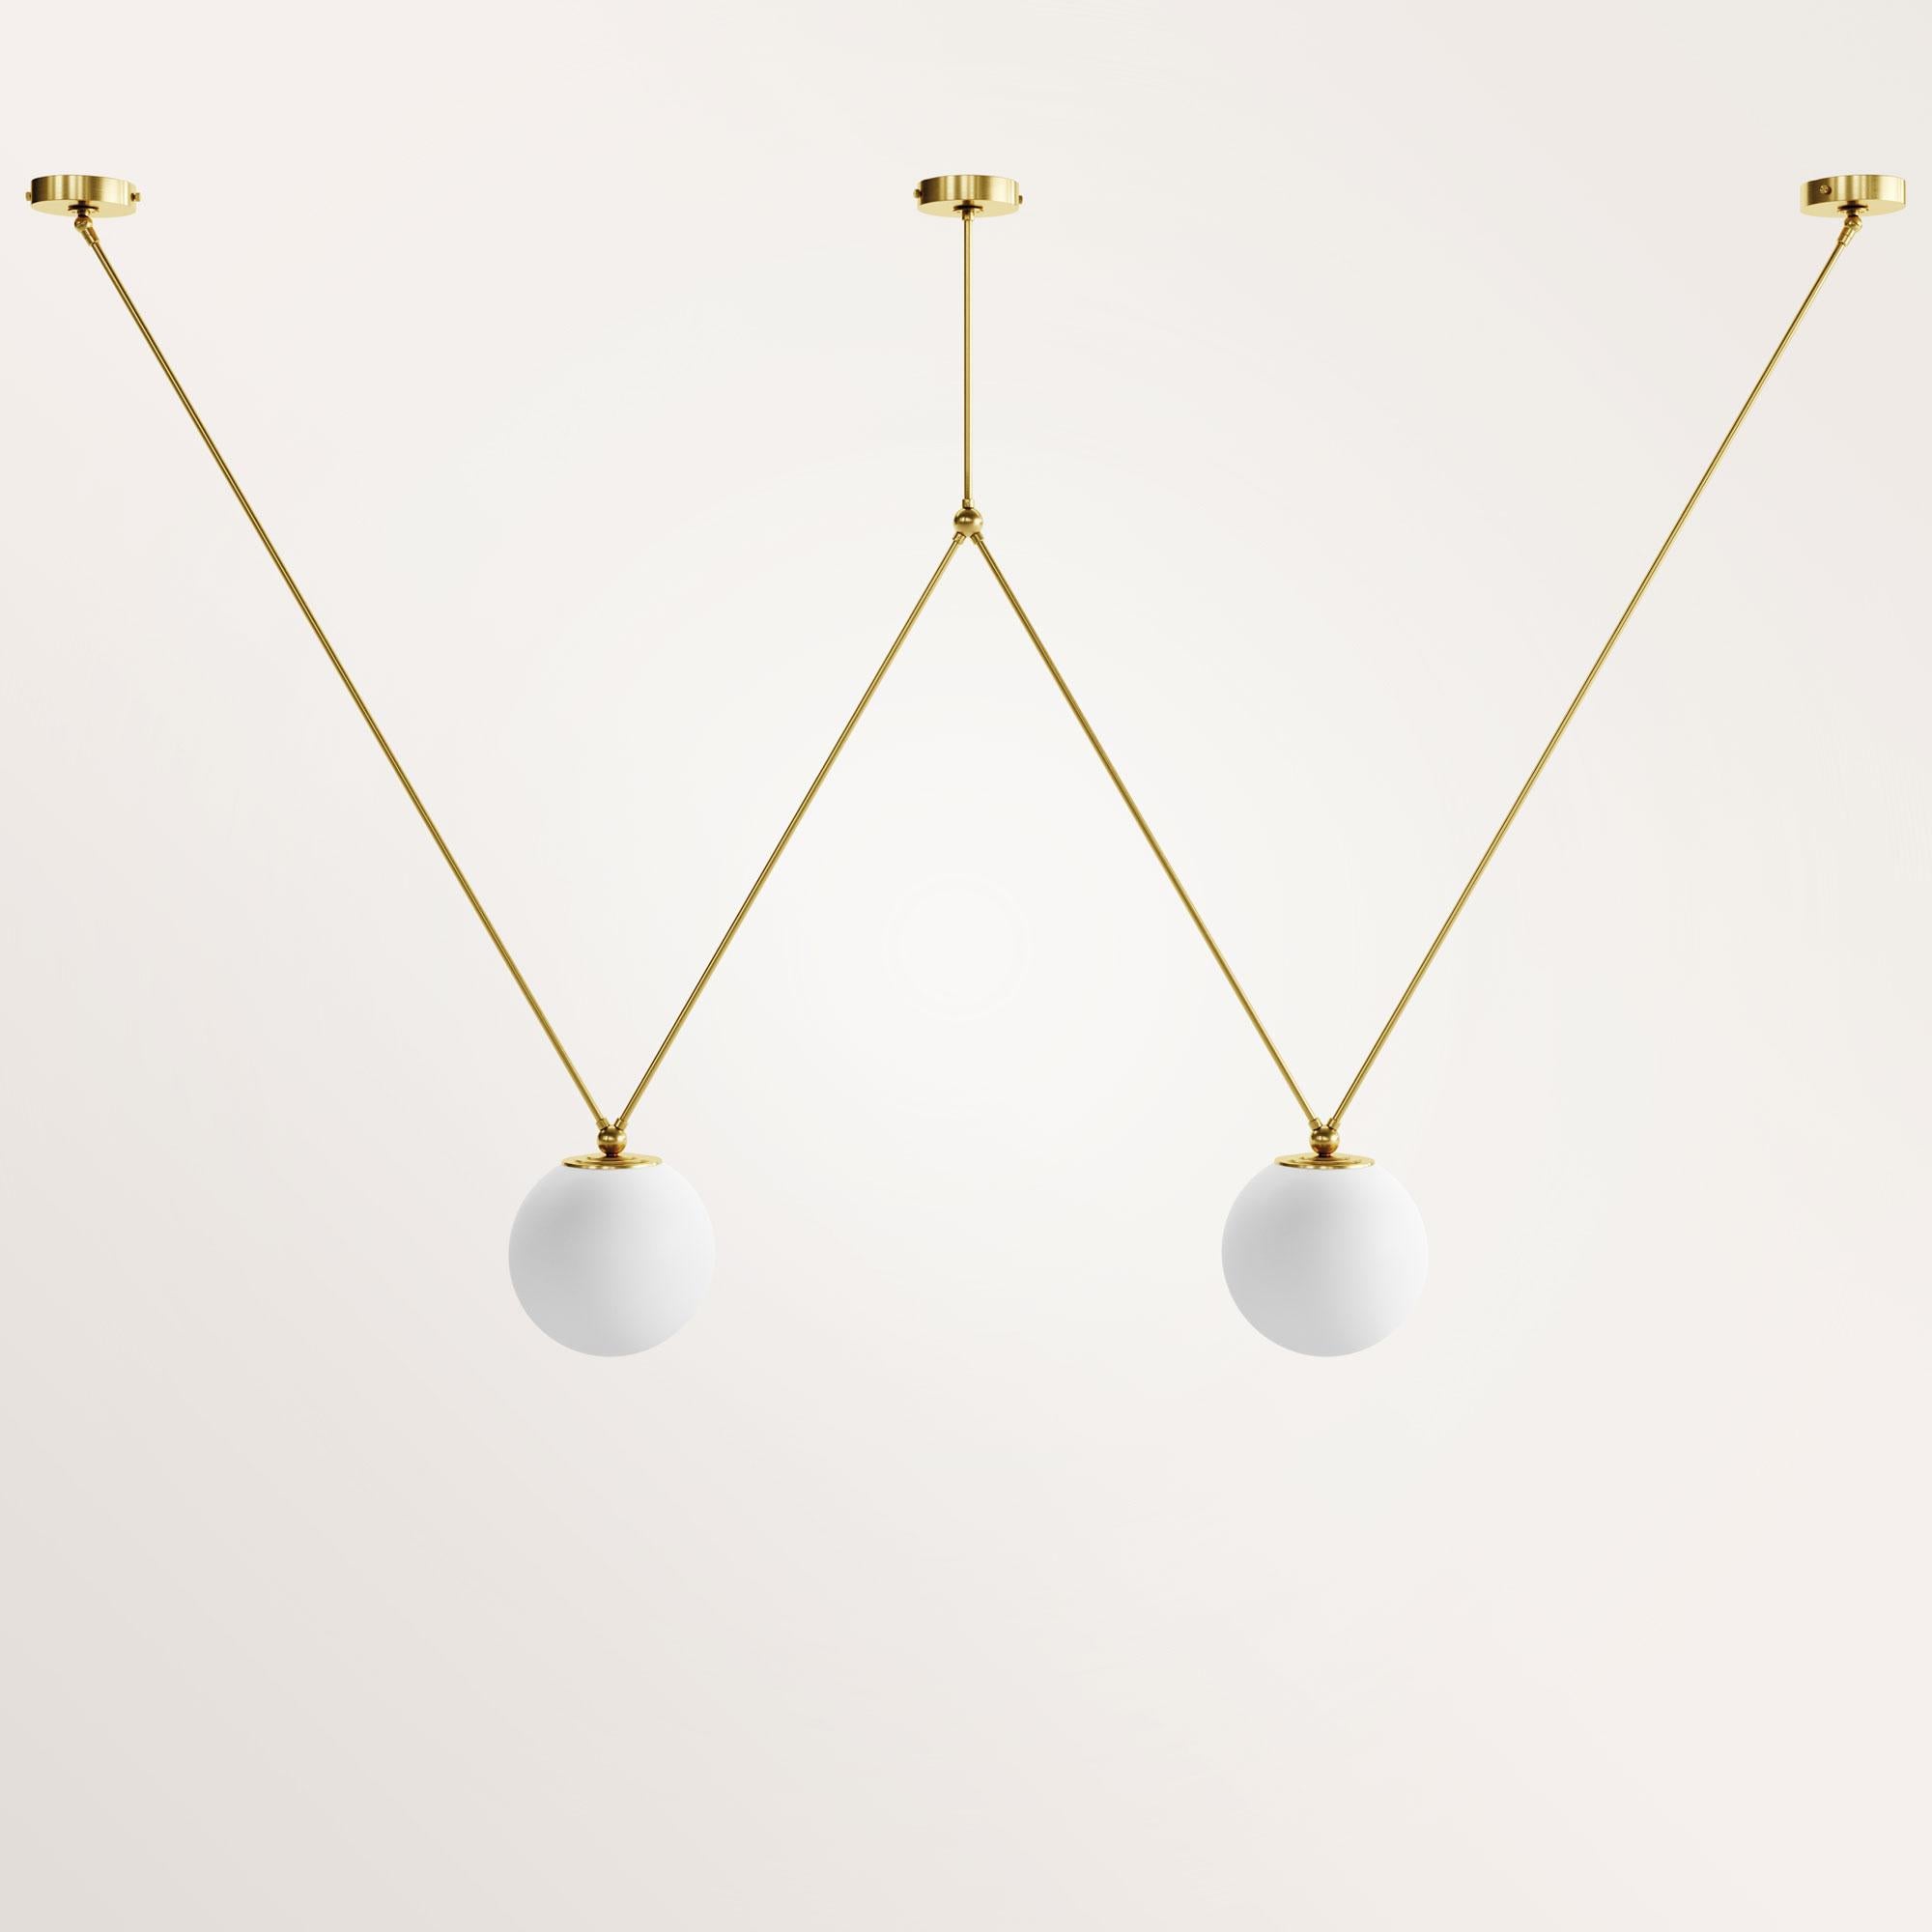 Handmade Medium Venus II chandelier by Gobo Lights
Dimensions: 170 L X 20 l X 115 H
Materials: Brass, Opaline

Venus is a Roman goddess who comes from a wave of the sea. She also is the goddess of beauty

Self-taught and from the world of